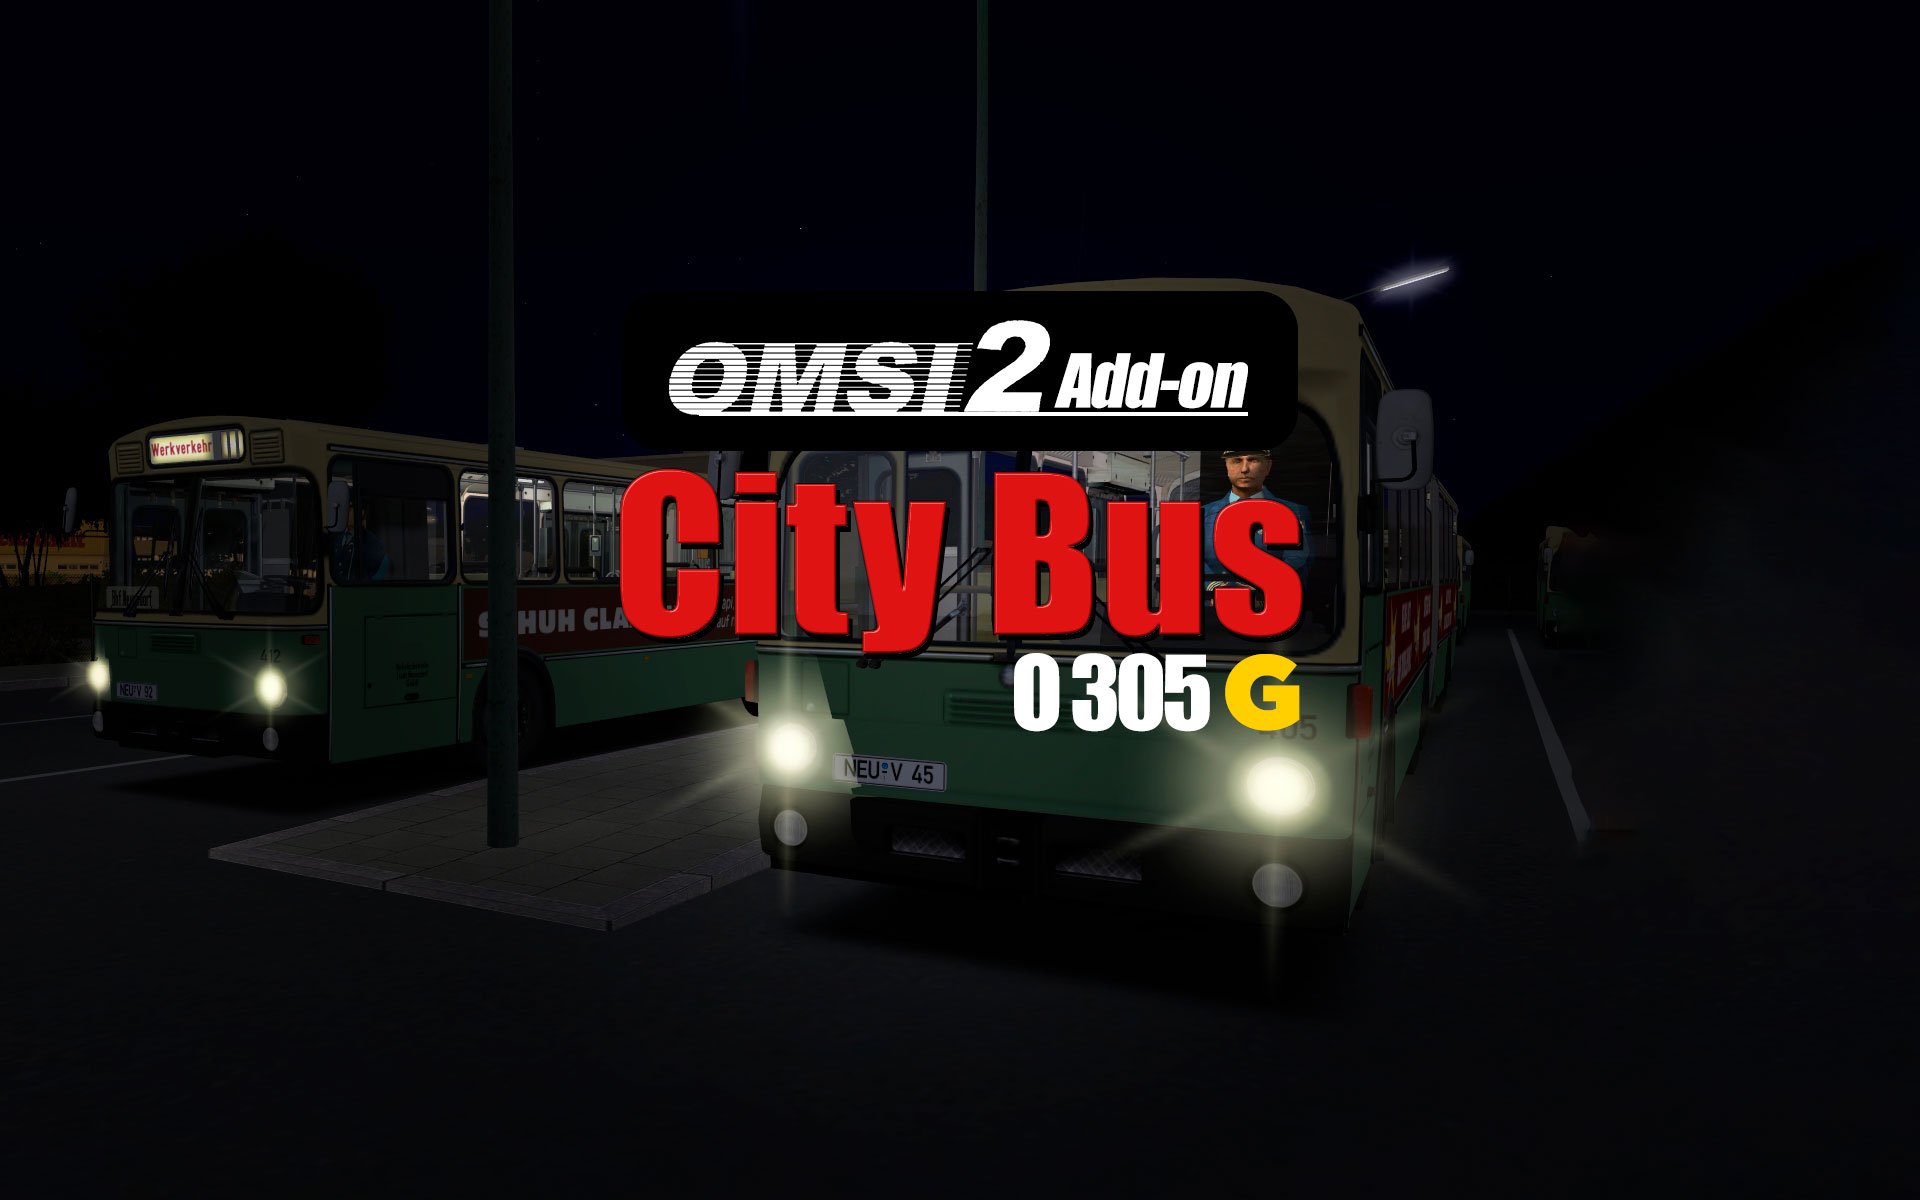 OMSI 2 - O305G Addon mod. F28cf51a-8598-4c28-9c8d-ec22e3689179omsi2CitybusO305G-cover